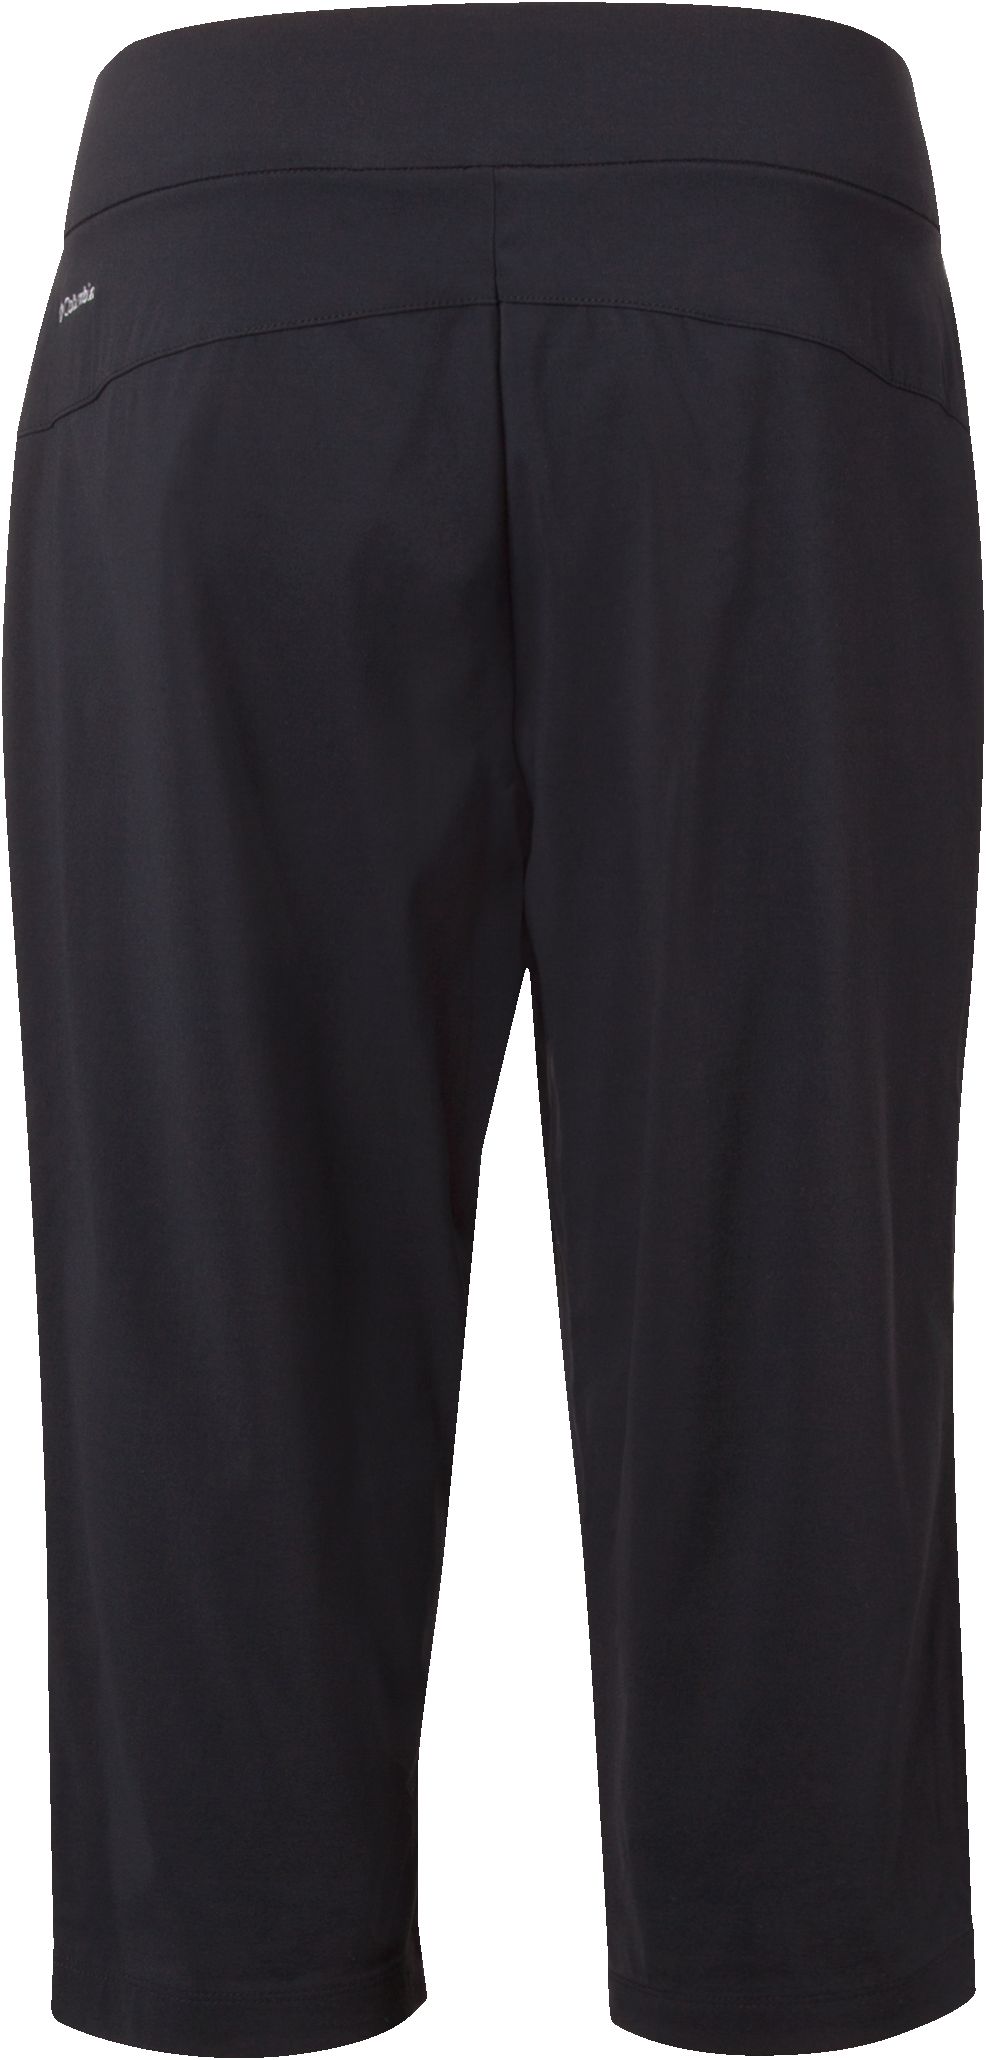 Columbia Women's Anytime Casual Capri Pants, Outdoor, Mid Rise